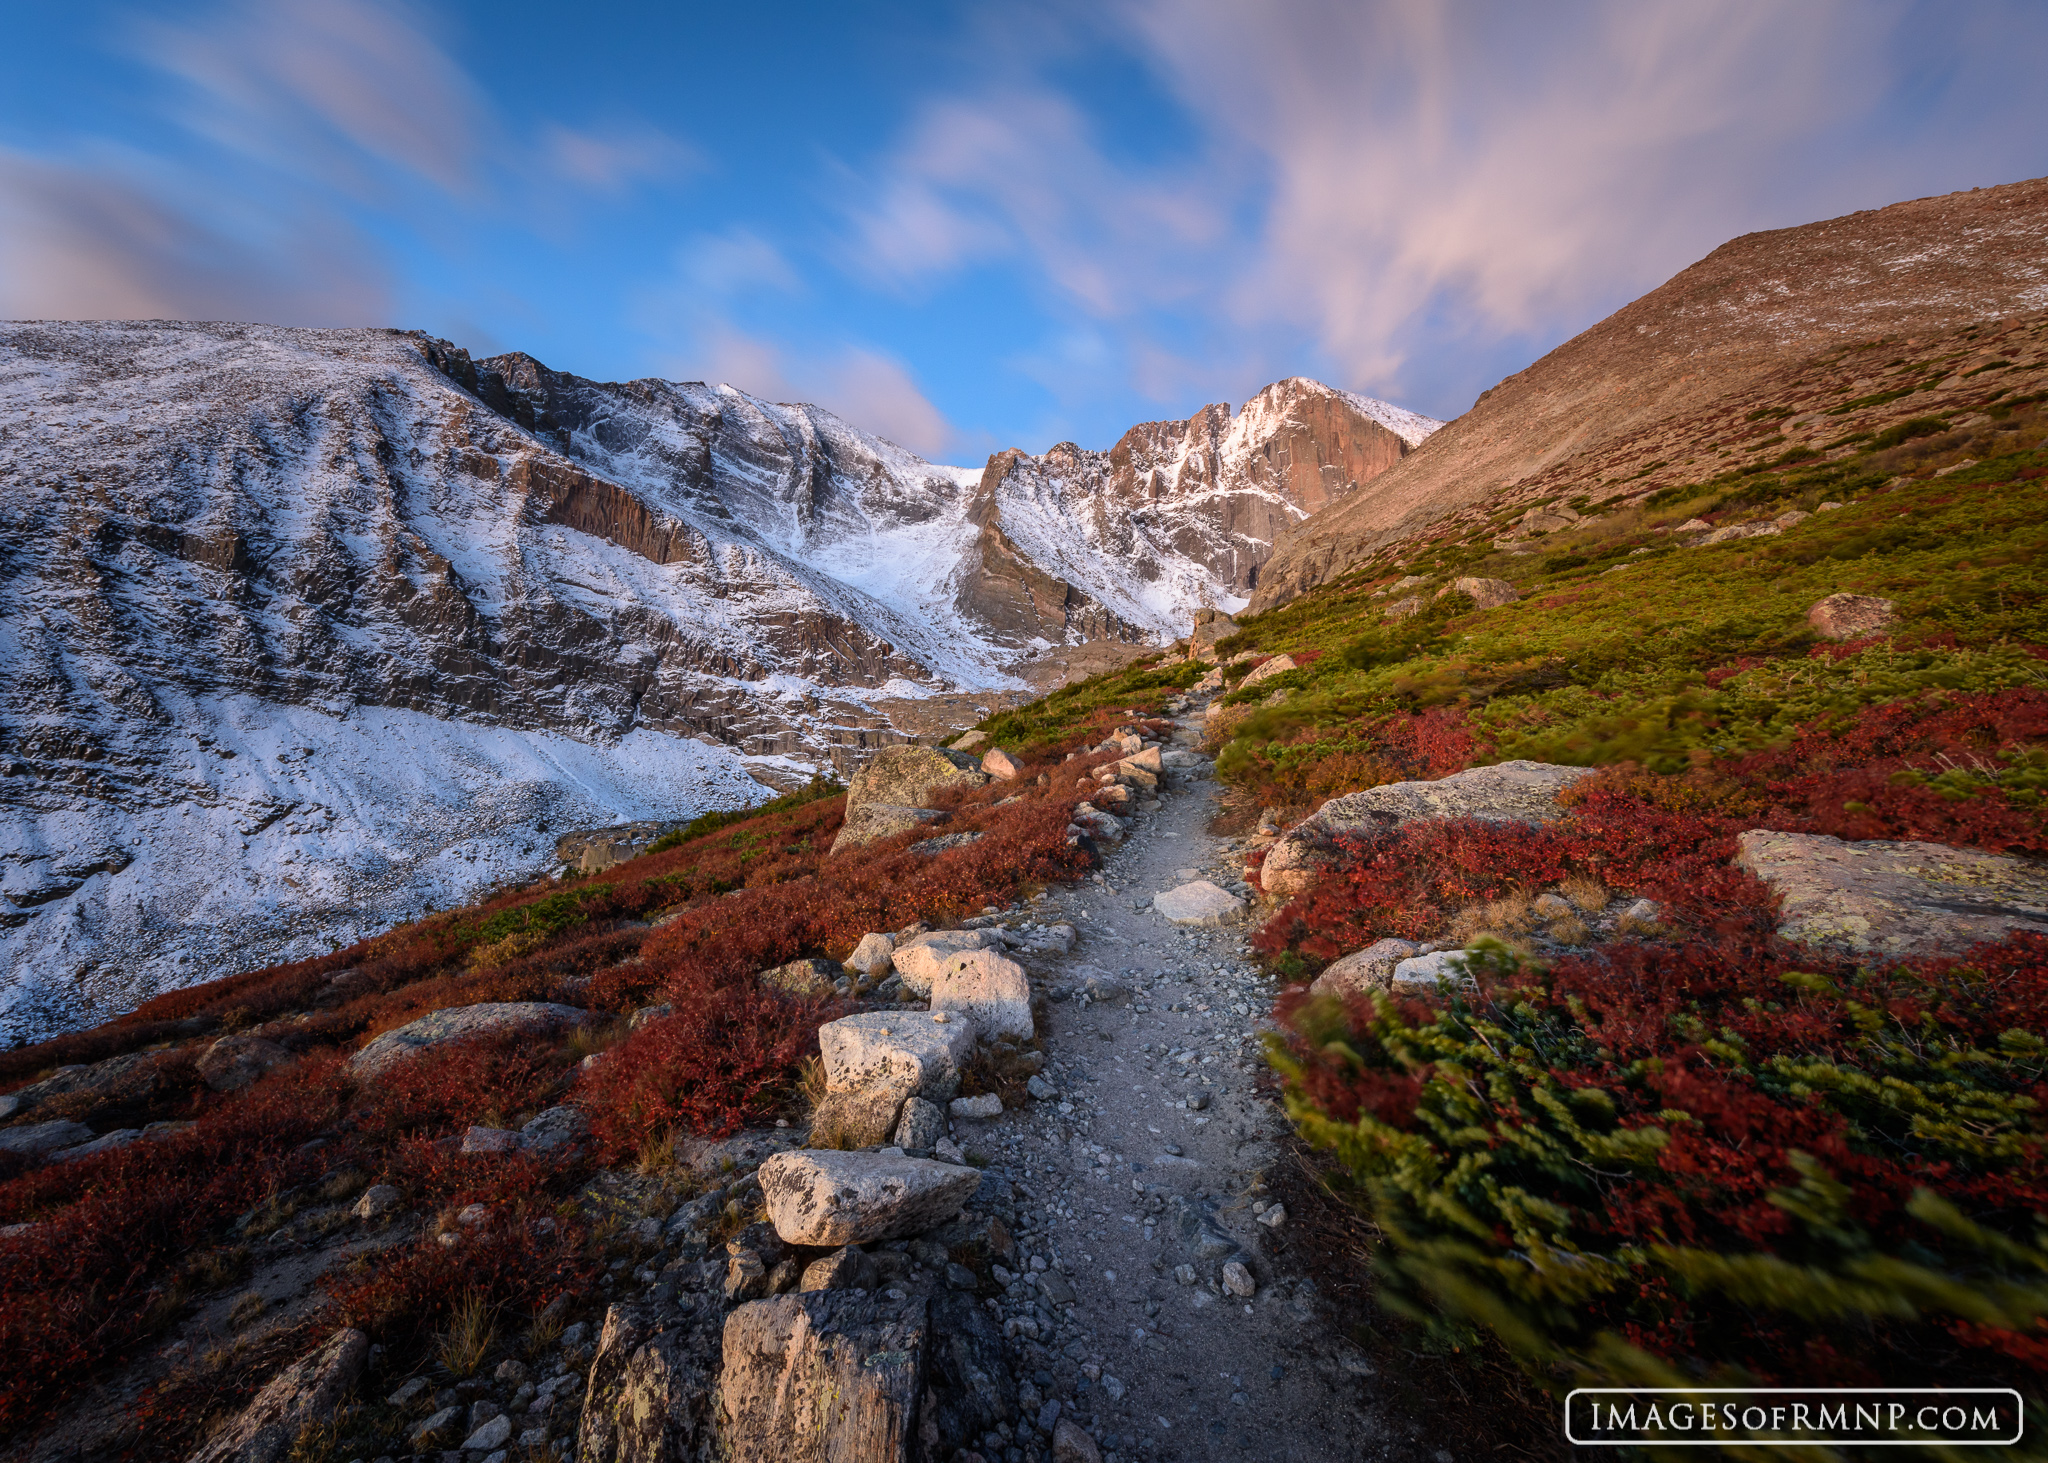 On a cool autumn morning the trail to Chasm Lake beckons the traveler onward.